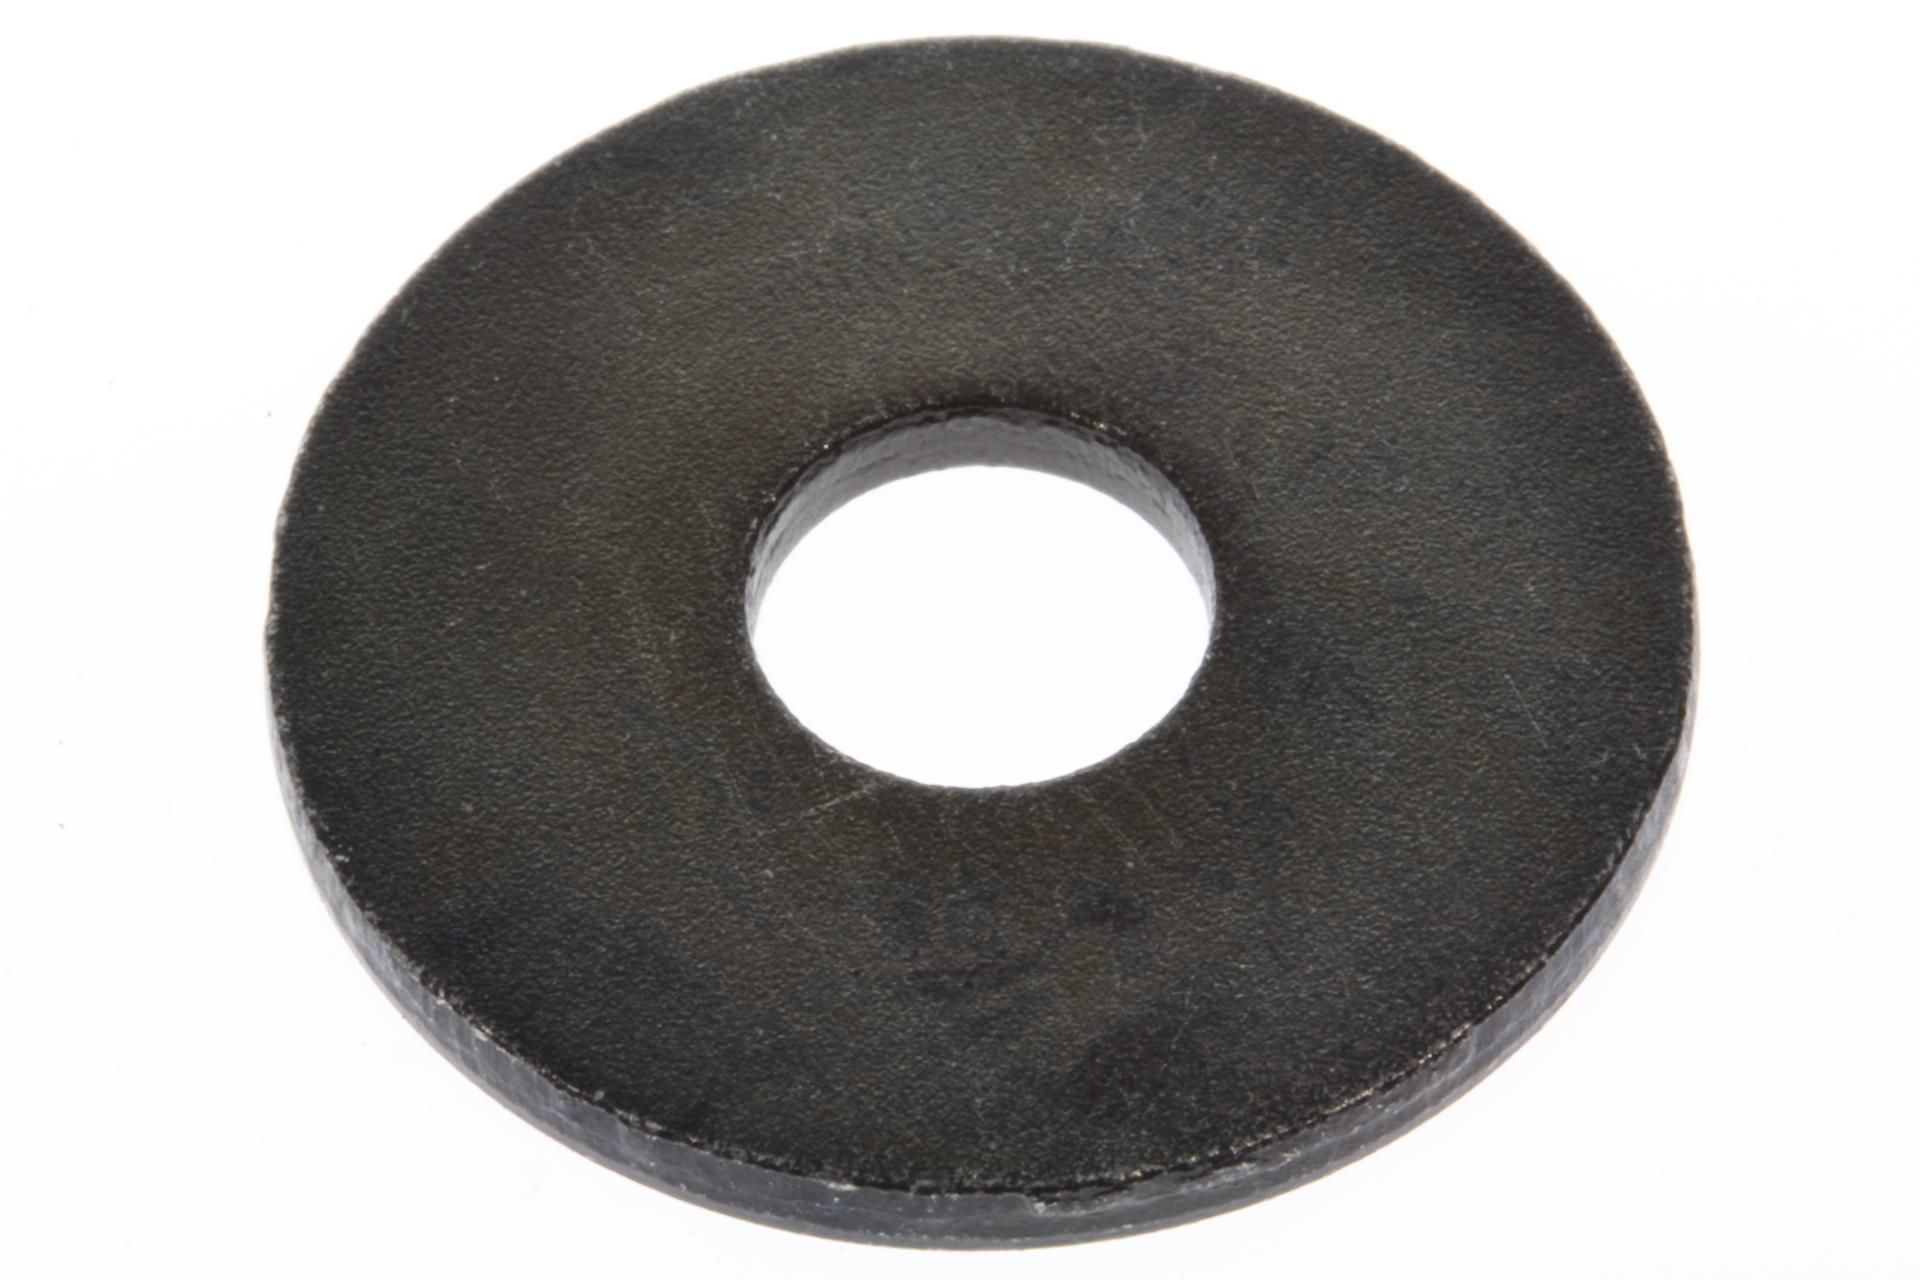 90201-08753-00 Superseded by 90201-081R9-00 - WASHER, PLATE 8AT